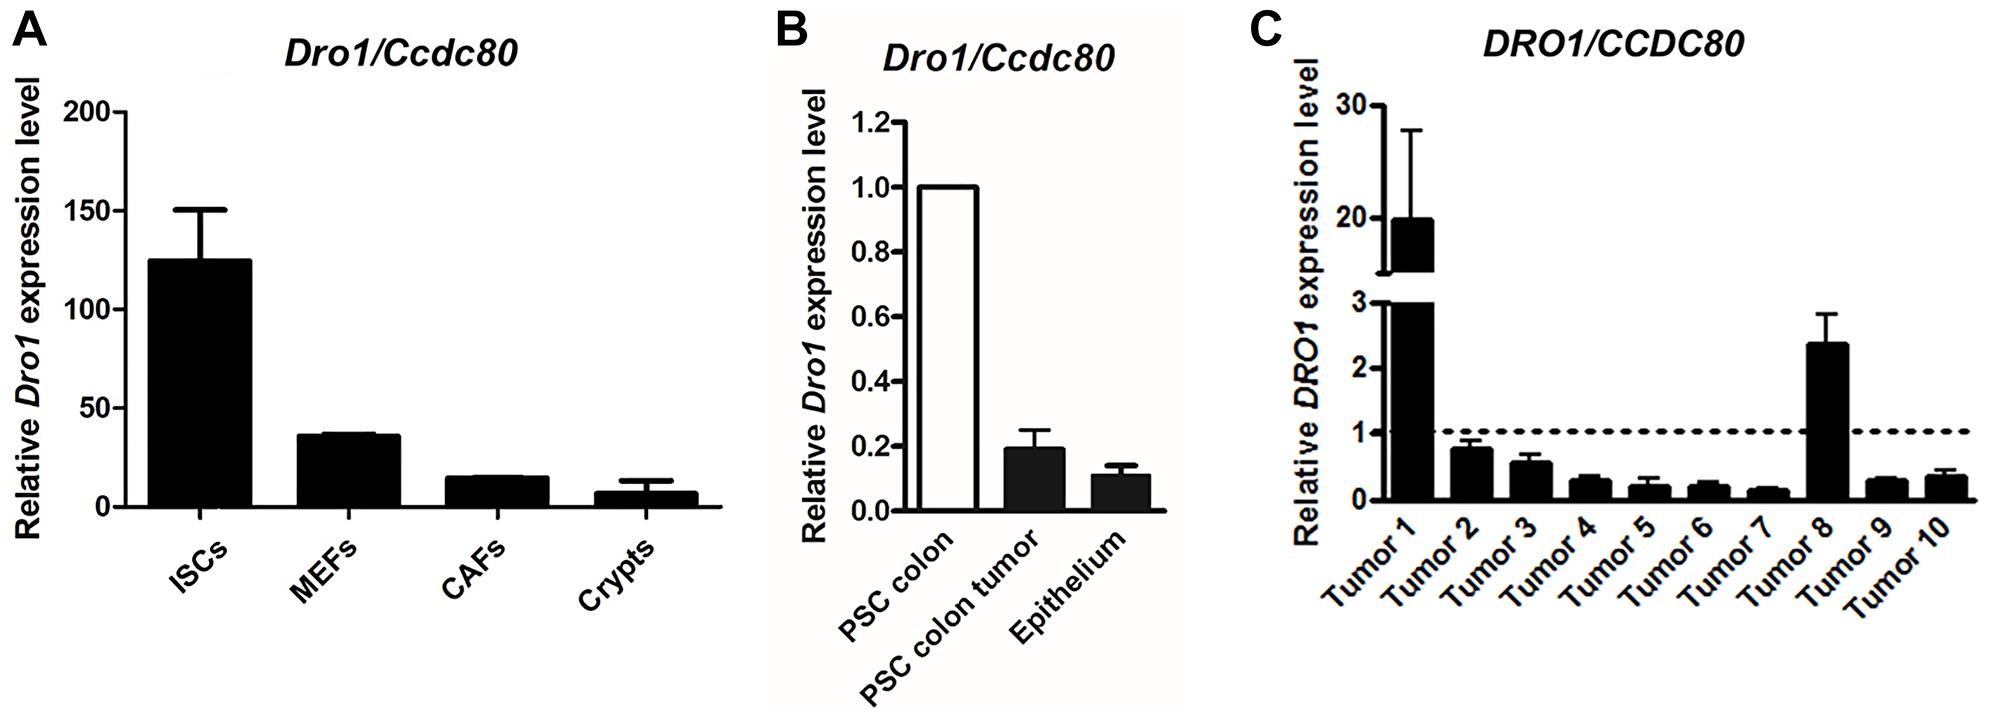 Figure 4: DRO1/CCDC80 is down-regulated in the stromal tumor compartment.